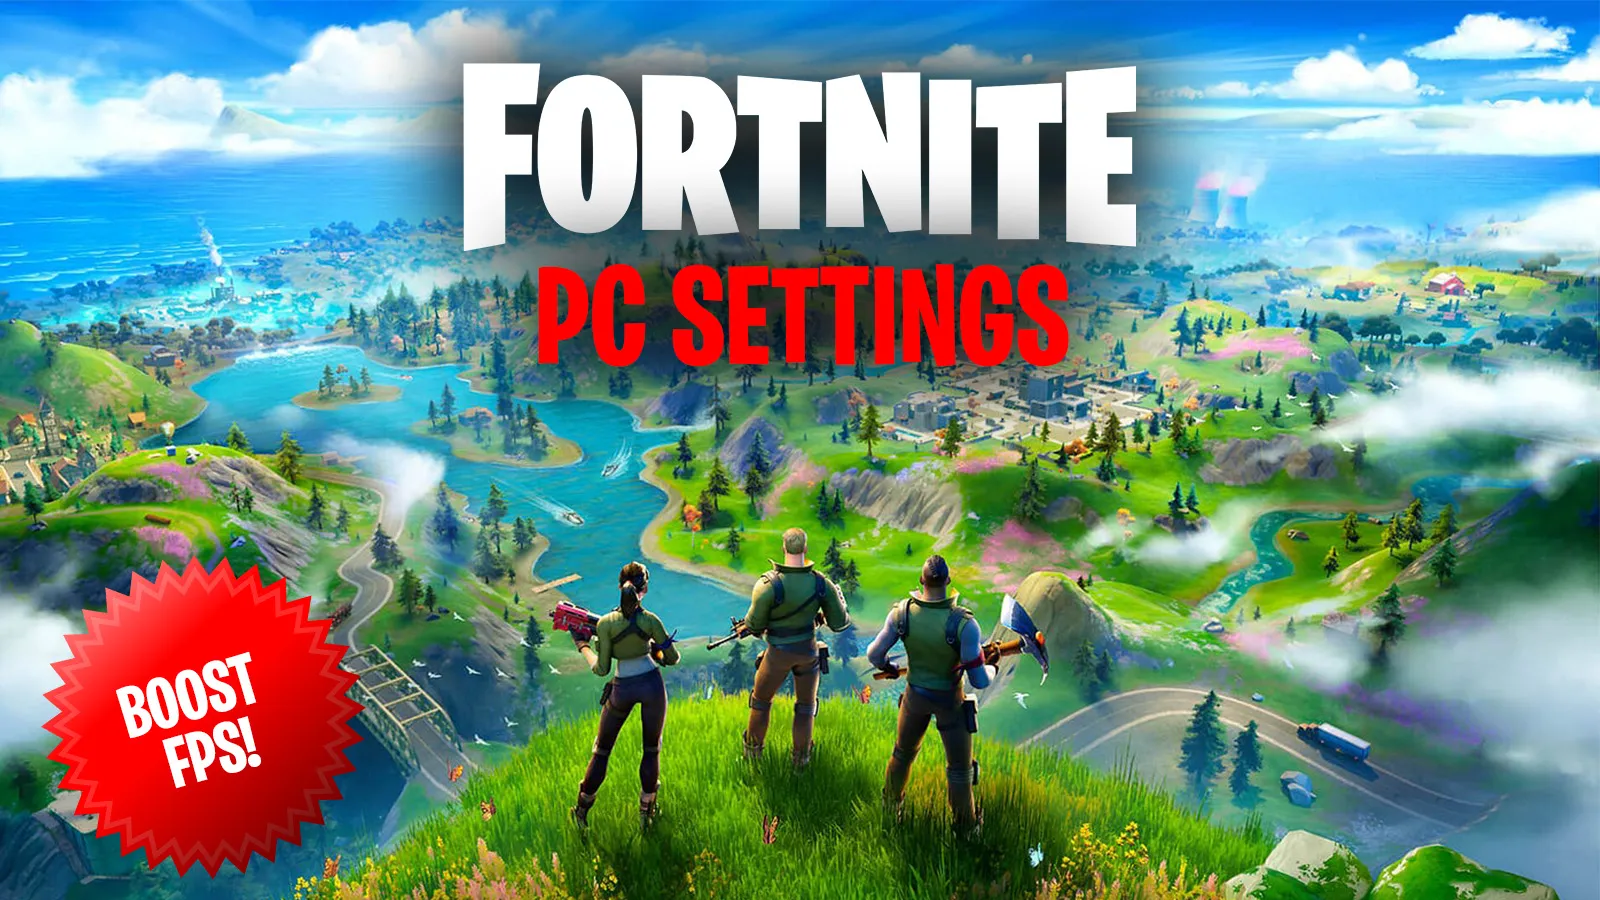 How to Increase FPS & Boost Gaming Performance on PC